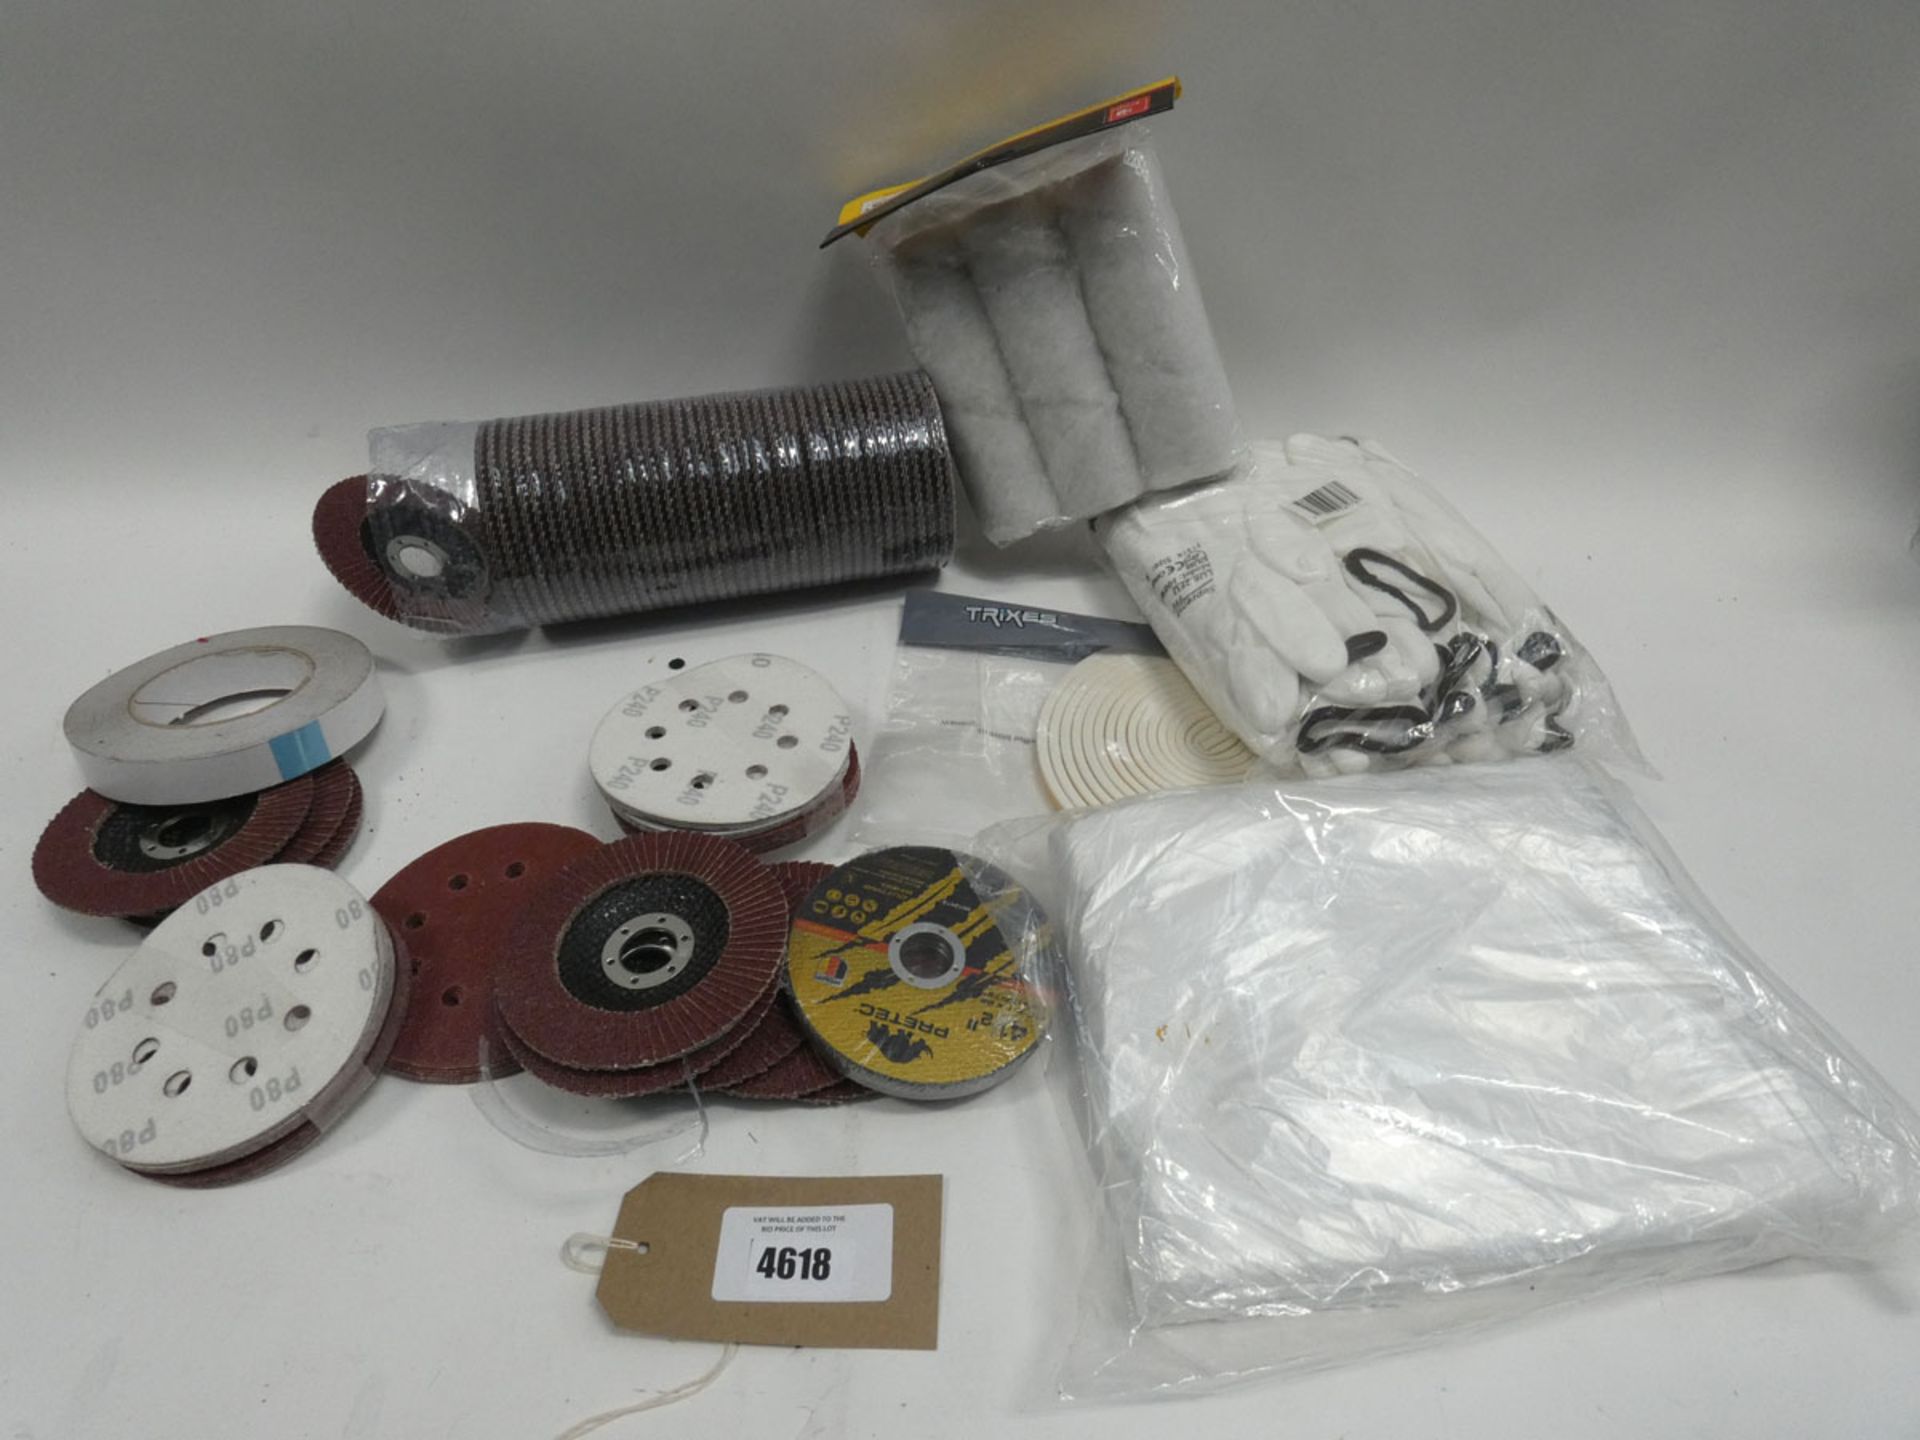 Bag containing: sanding pads, flapper wheels, work gloves, paint rollers, dust sheet, tape etc